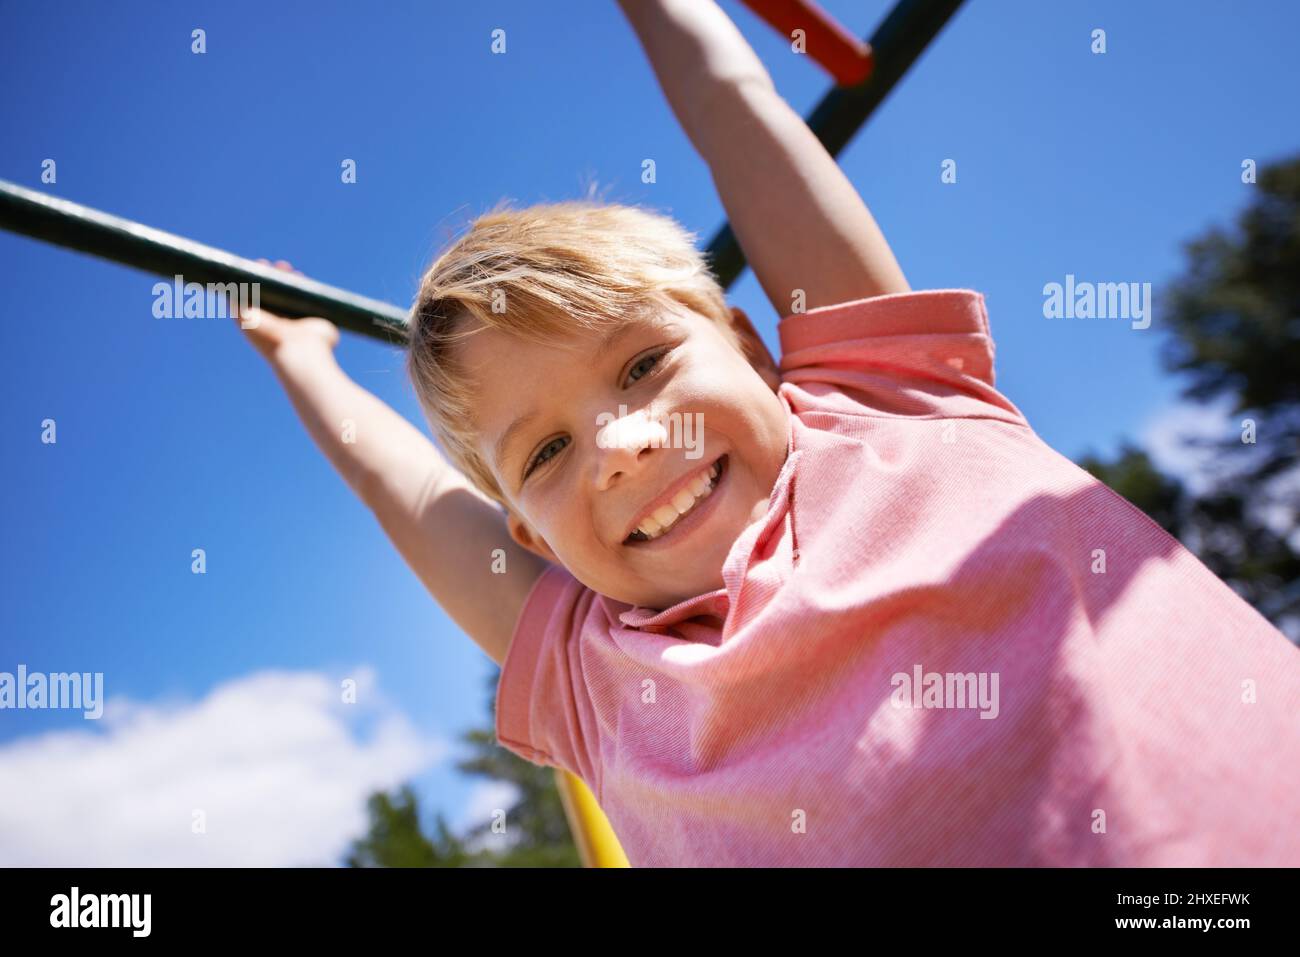 Playtime. A little boy playing in the park. Stock Photo